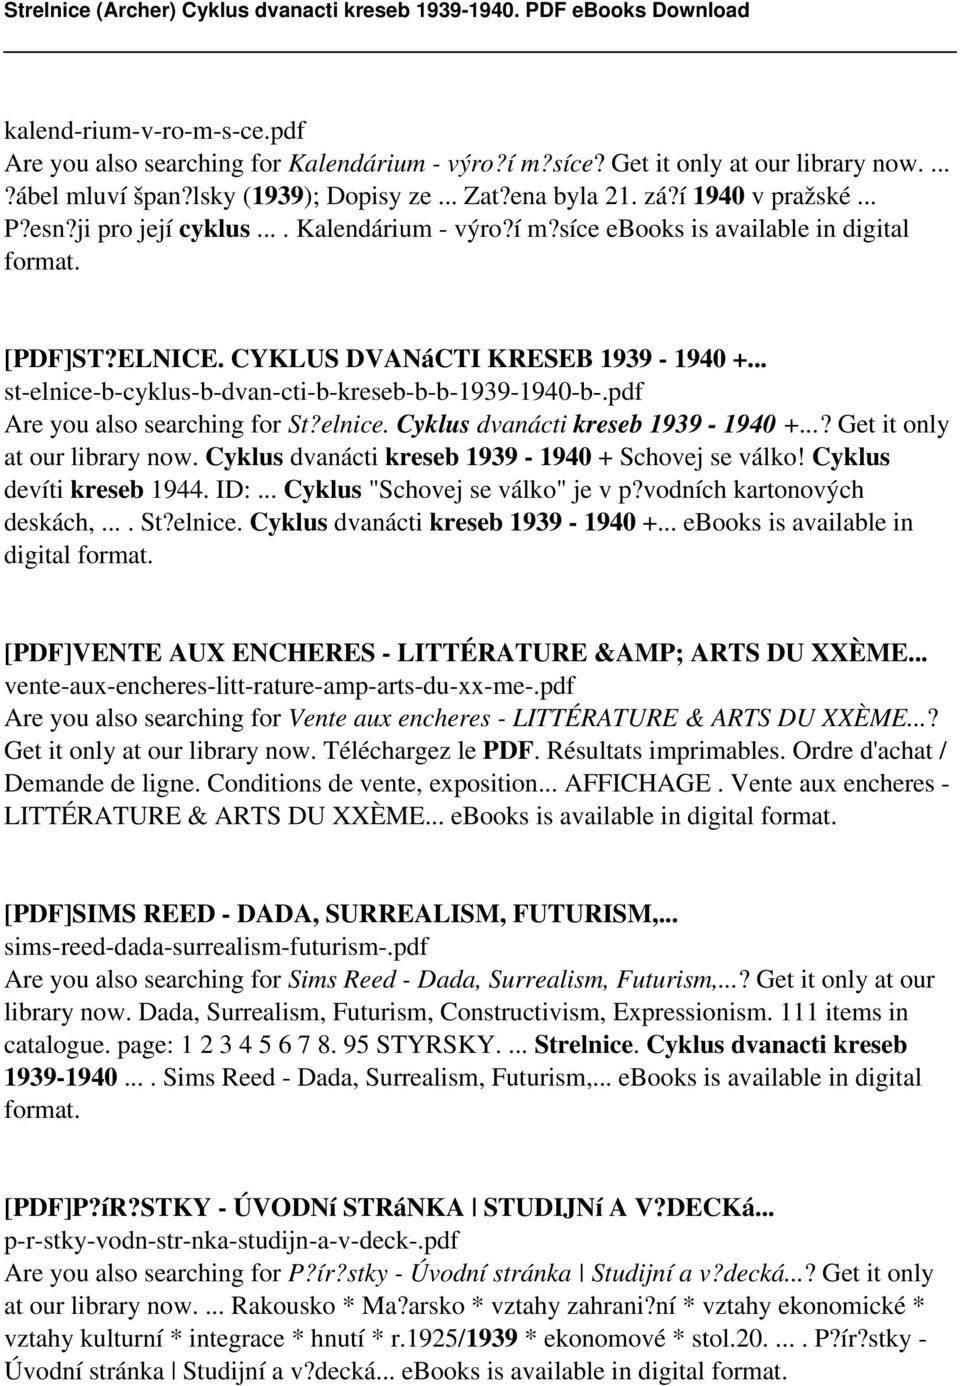 pdf Are you also searching for St?elnice. Cyklus dvanácti kreseb 1939-1940 +...? Get it only at our library now. Cyklus dvanácti kreseb 1939-1940 + Schovej se válko! Cyklus devíti kreseb 1944. ID:.